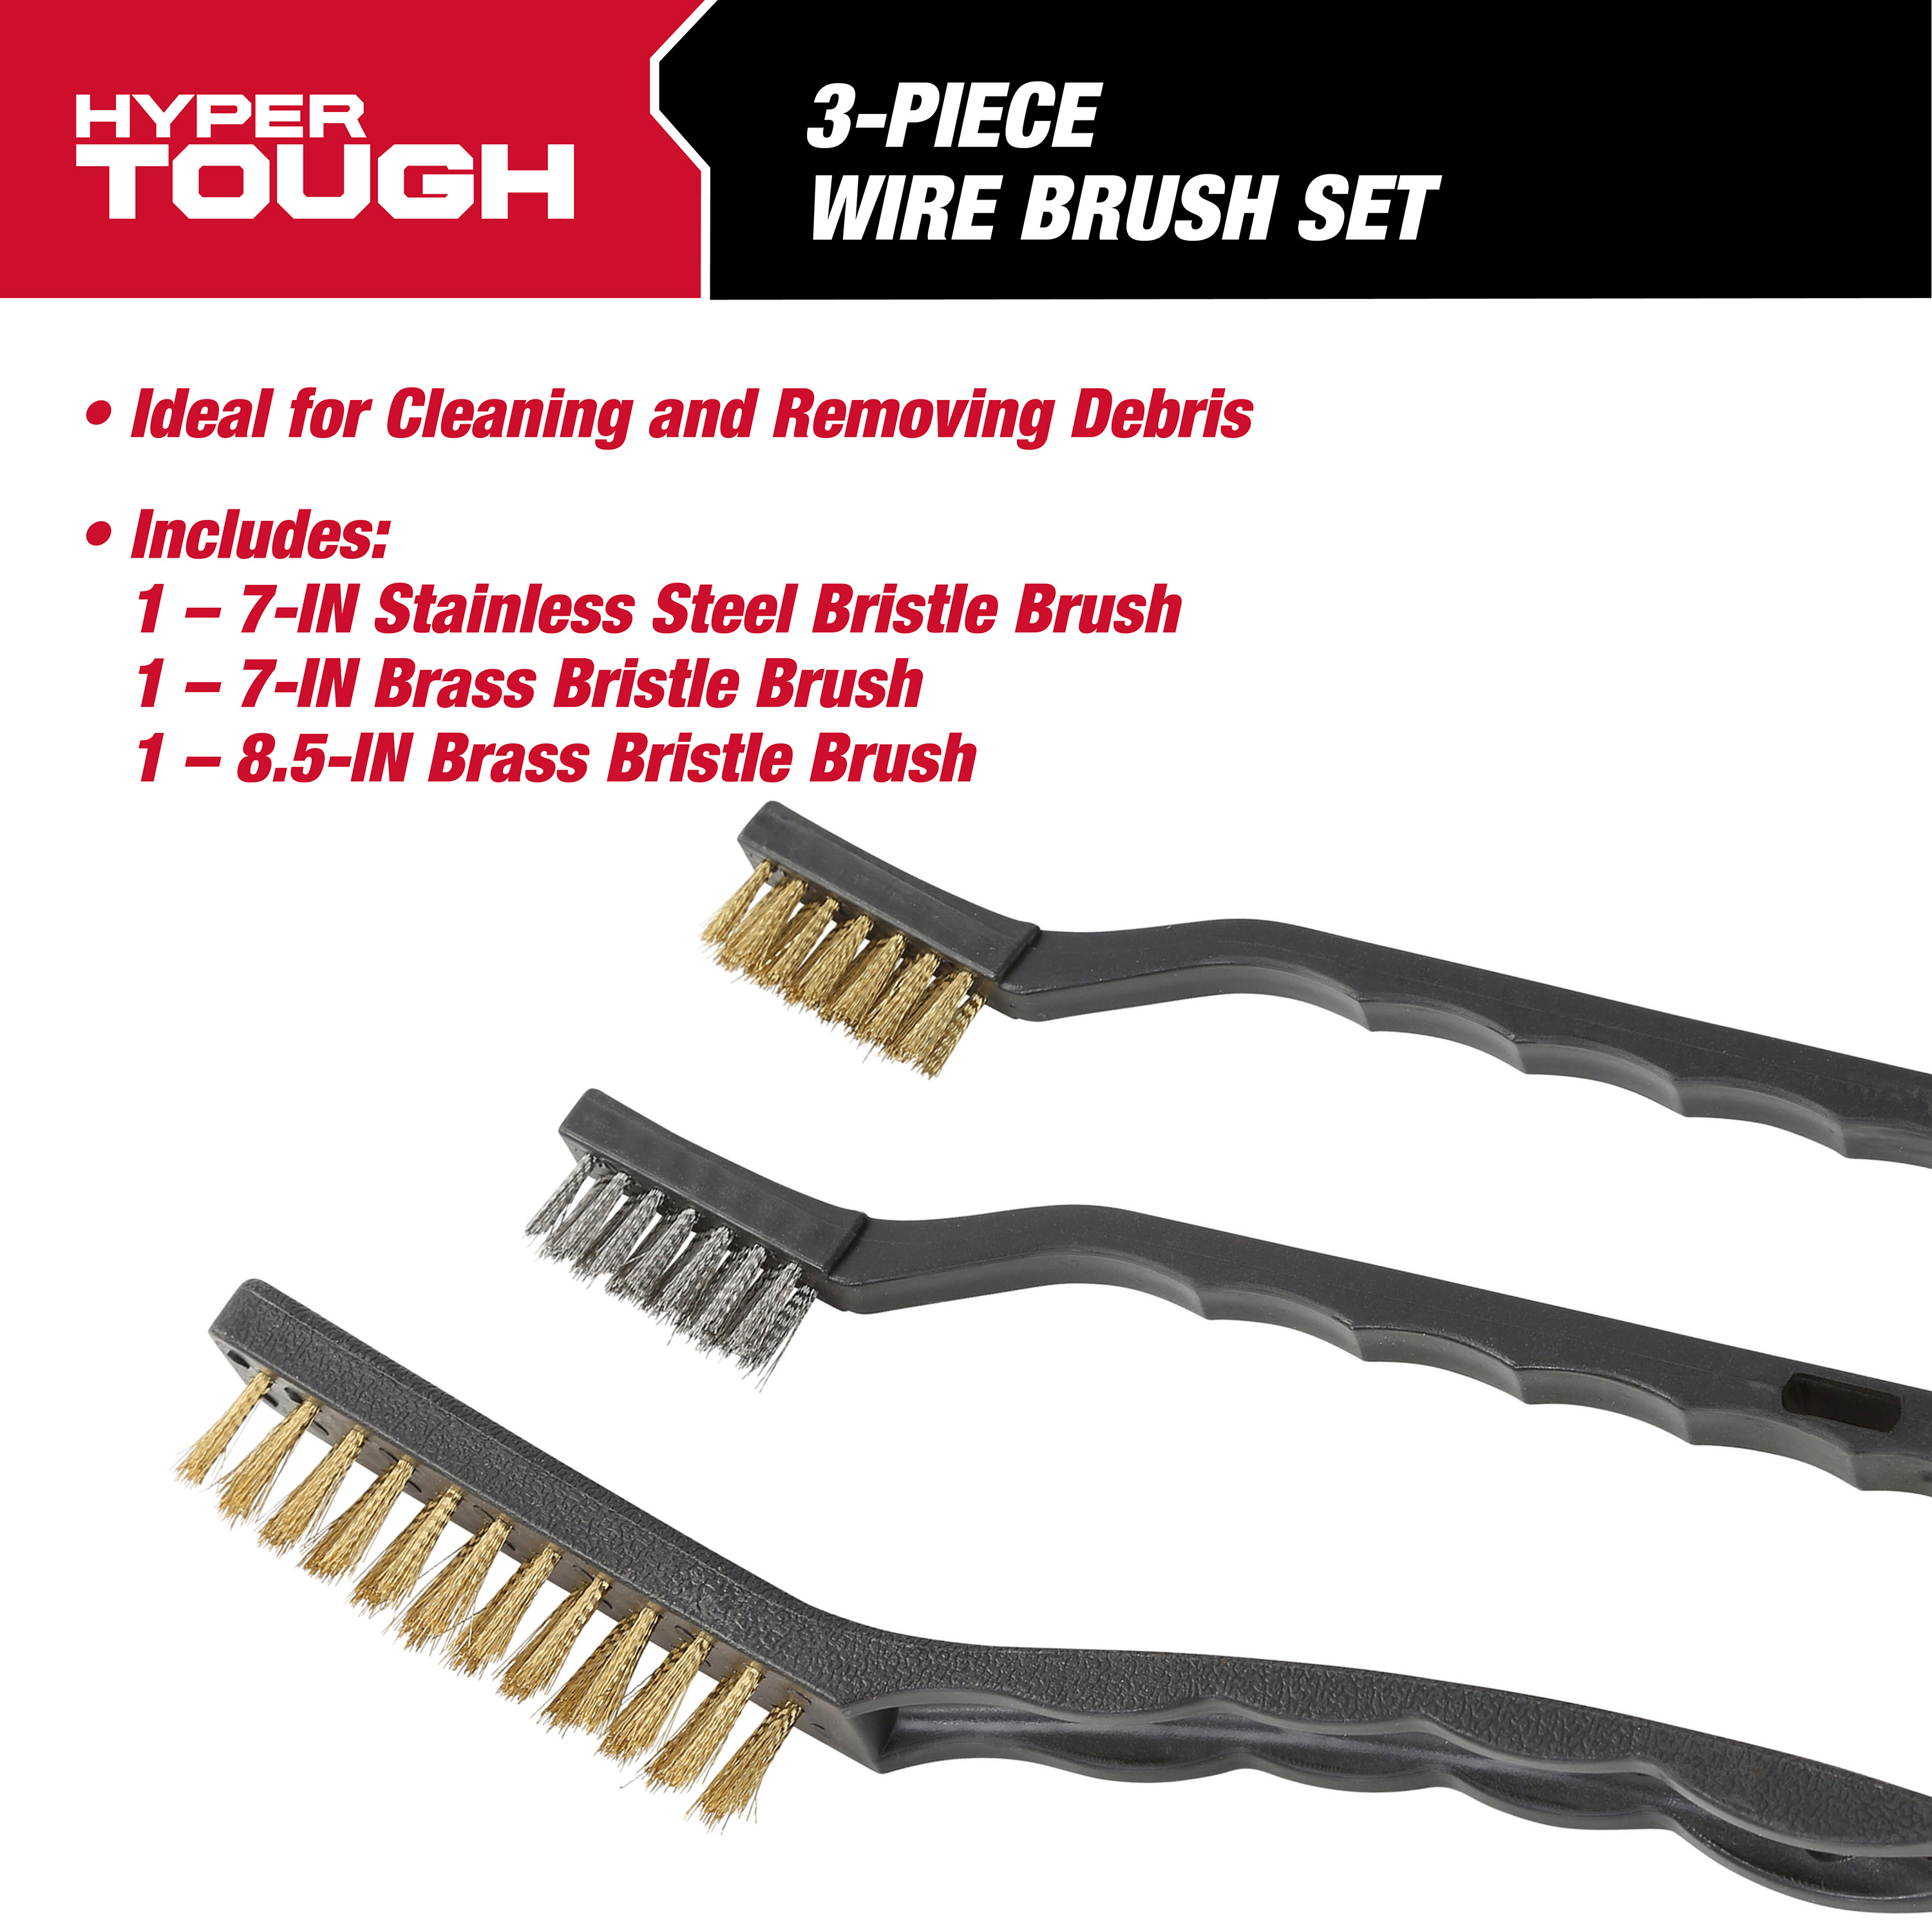 Hyper Tough 3-Piece Wire Brush Set for Utility Cleaning, Brass and Stainless Steel Brushes - image 3 of 8